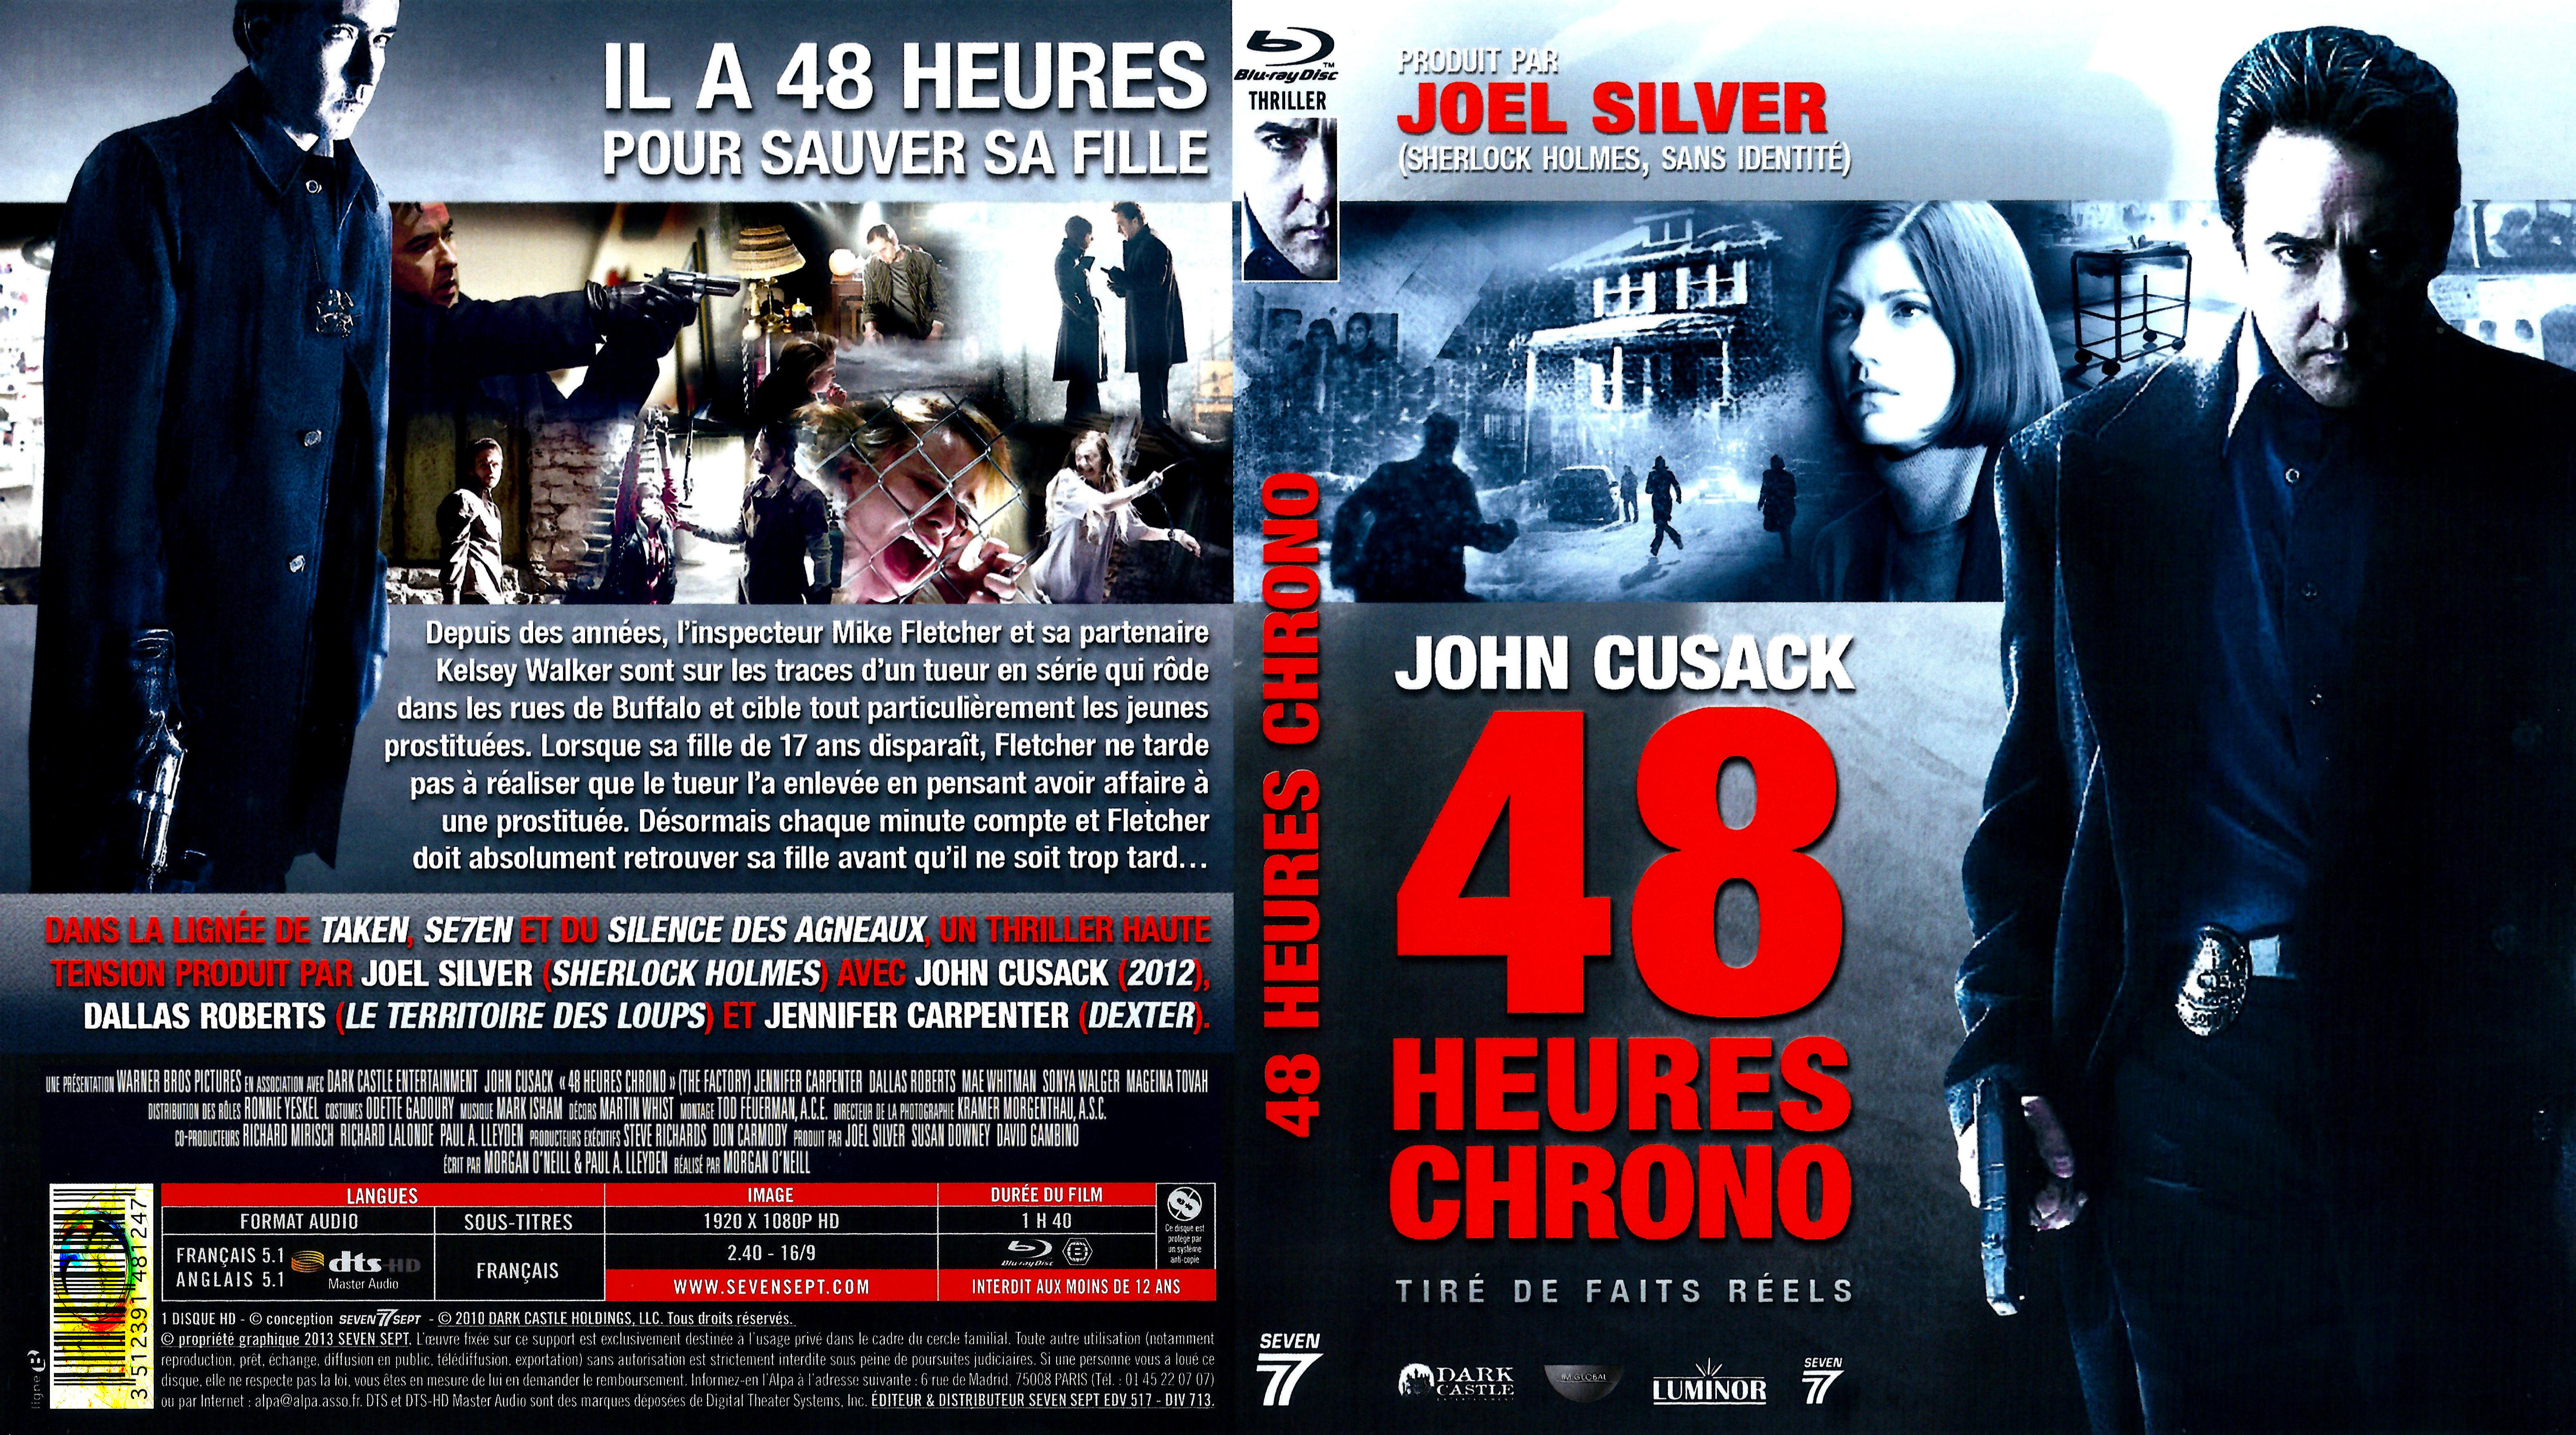 Jaquette DVD 48 Heures chrono (BLU-RAY)